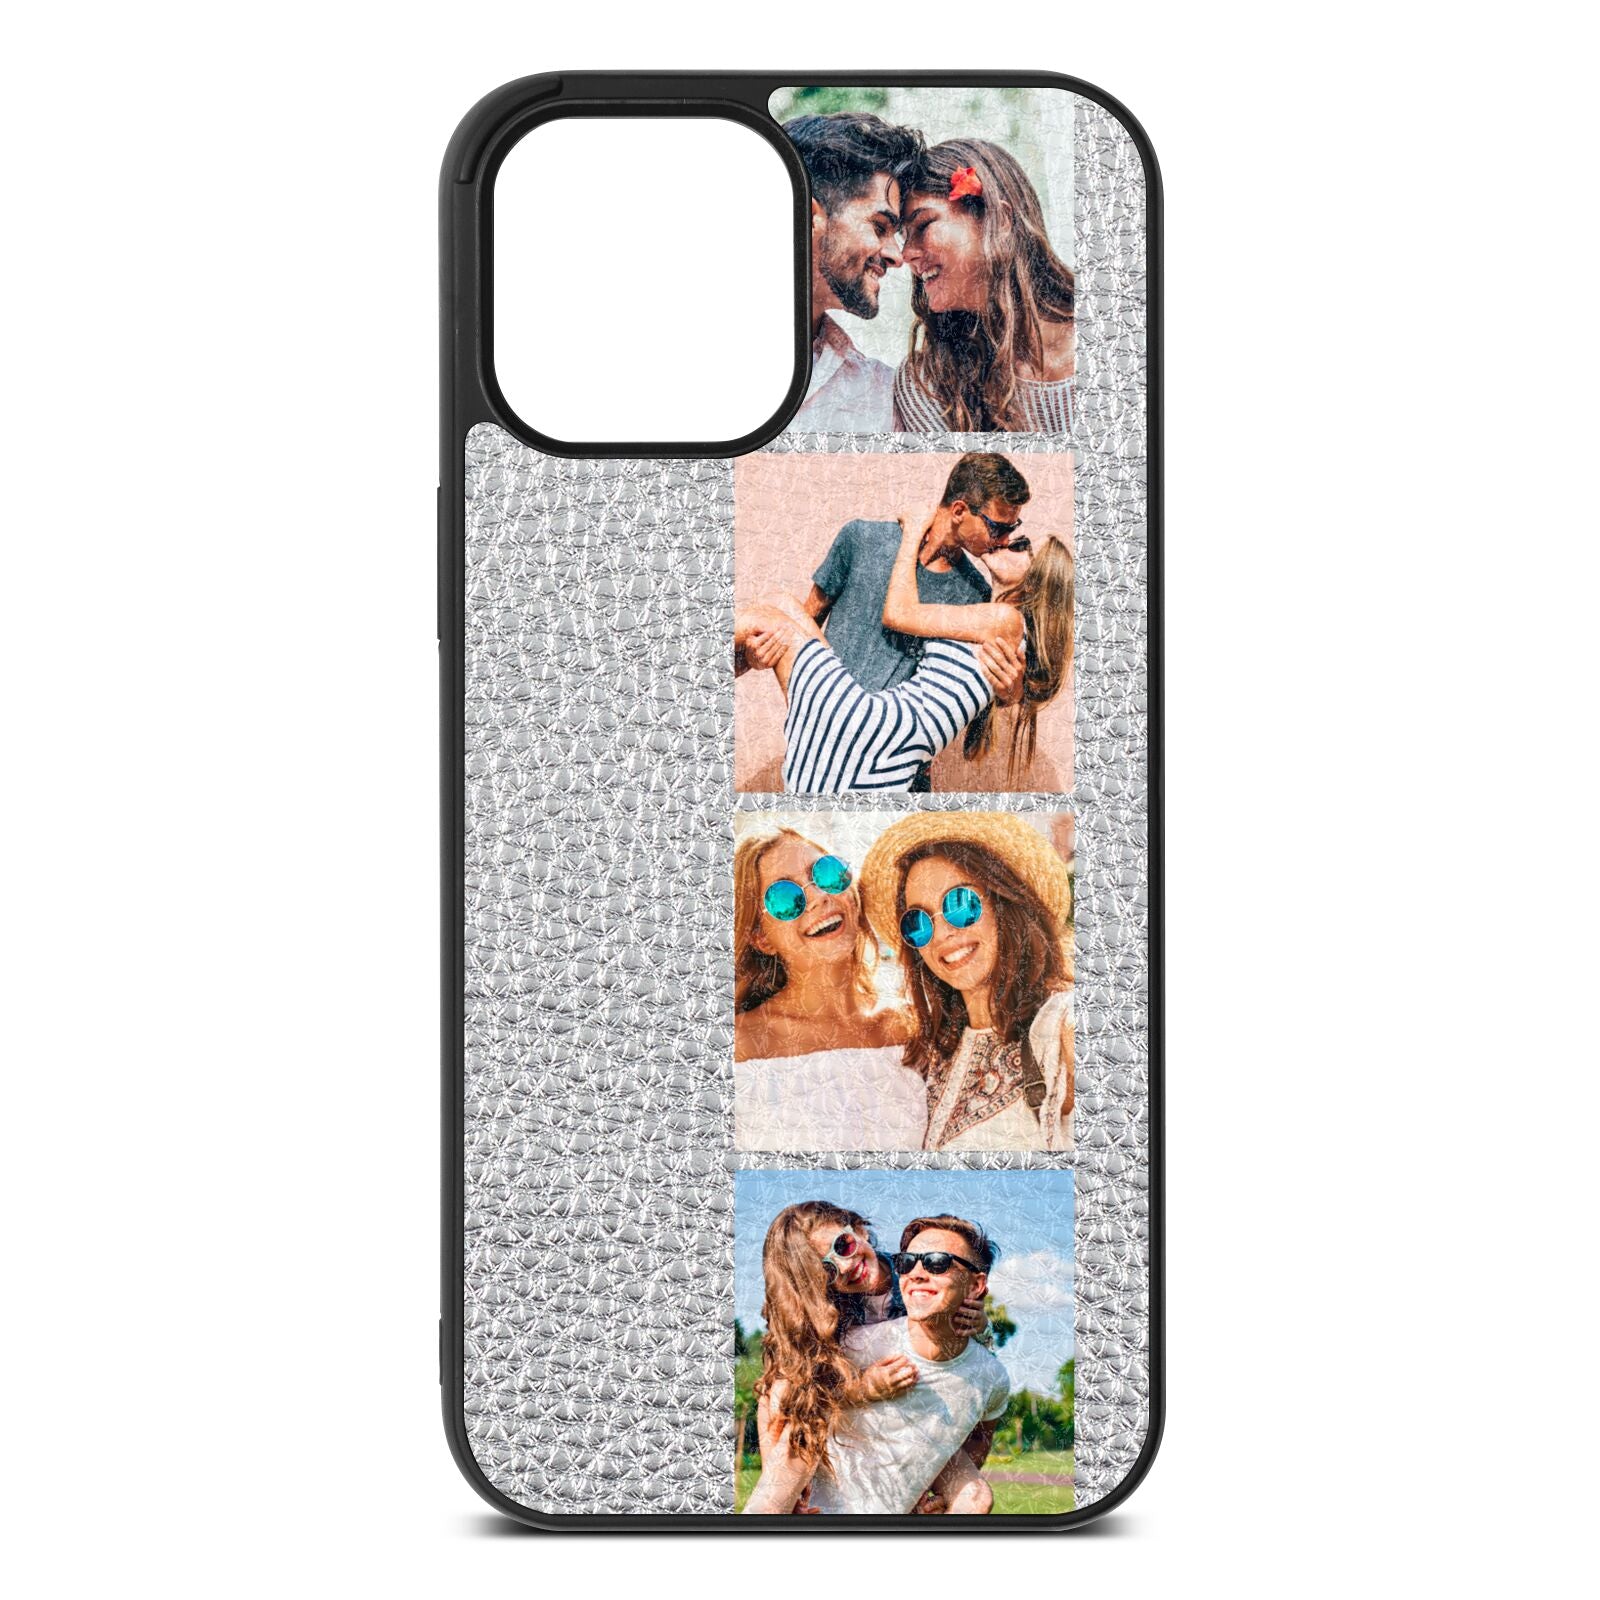 Photo Strip Montage Upload Silver Pebble Leather iPhone 12 Pro Max Case